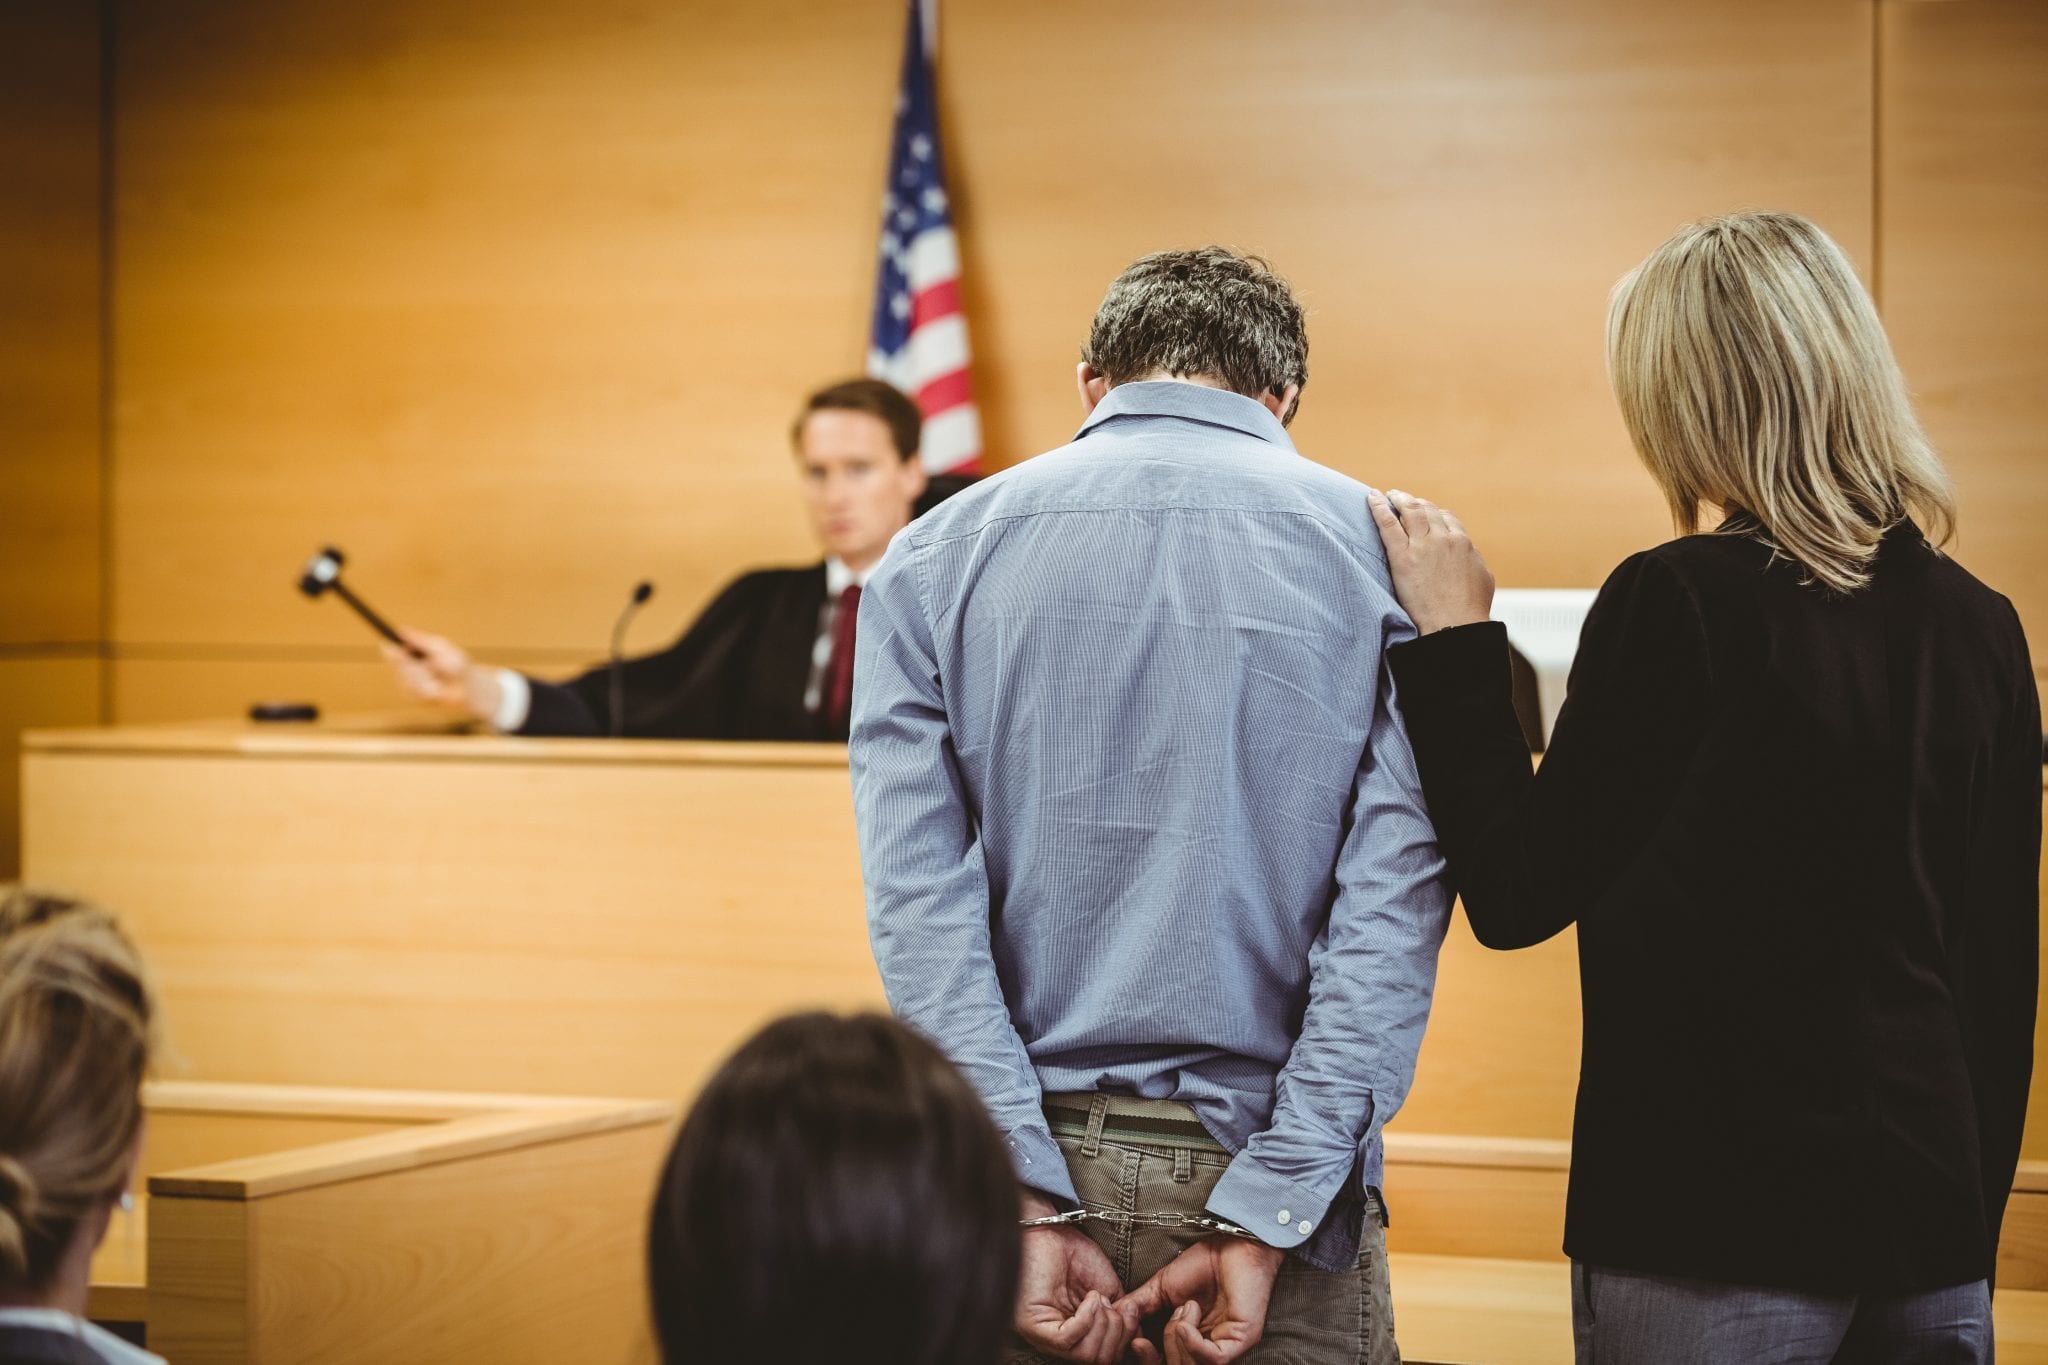 The Competency of the Defendant Is Discussed in a Courtroom.